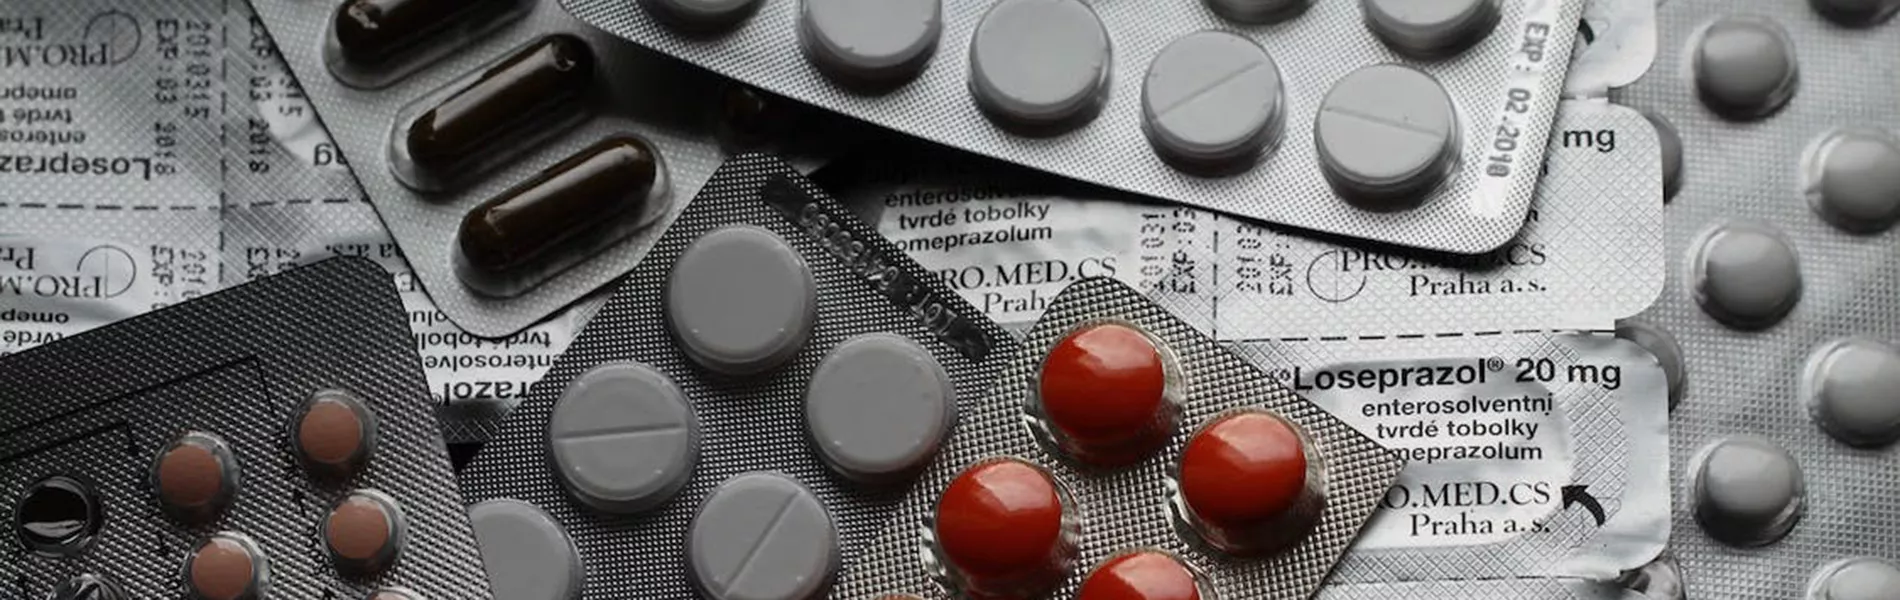 AsiaPacific Regulatory & Industry Views on Drug Shortage Prevention